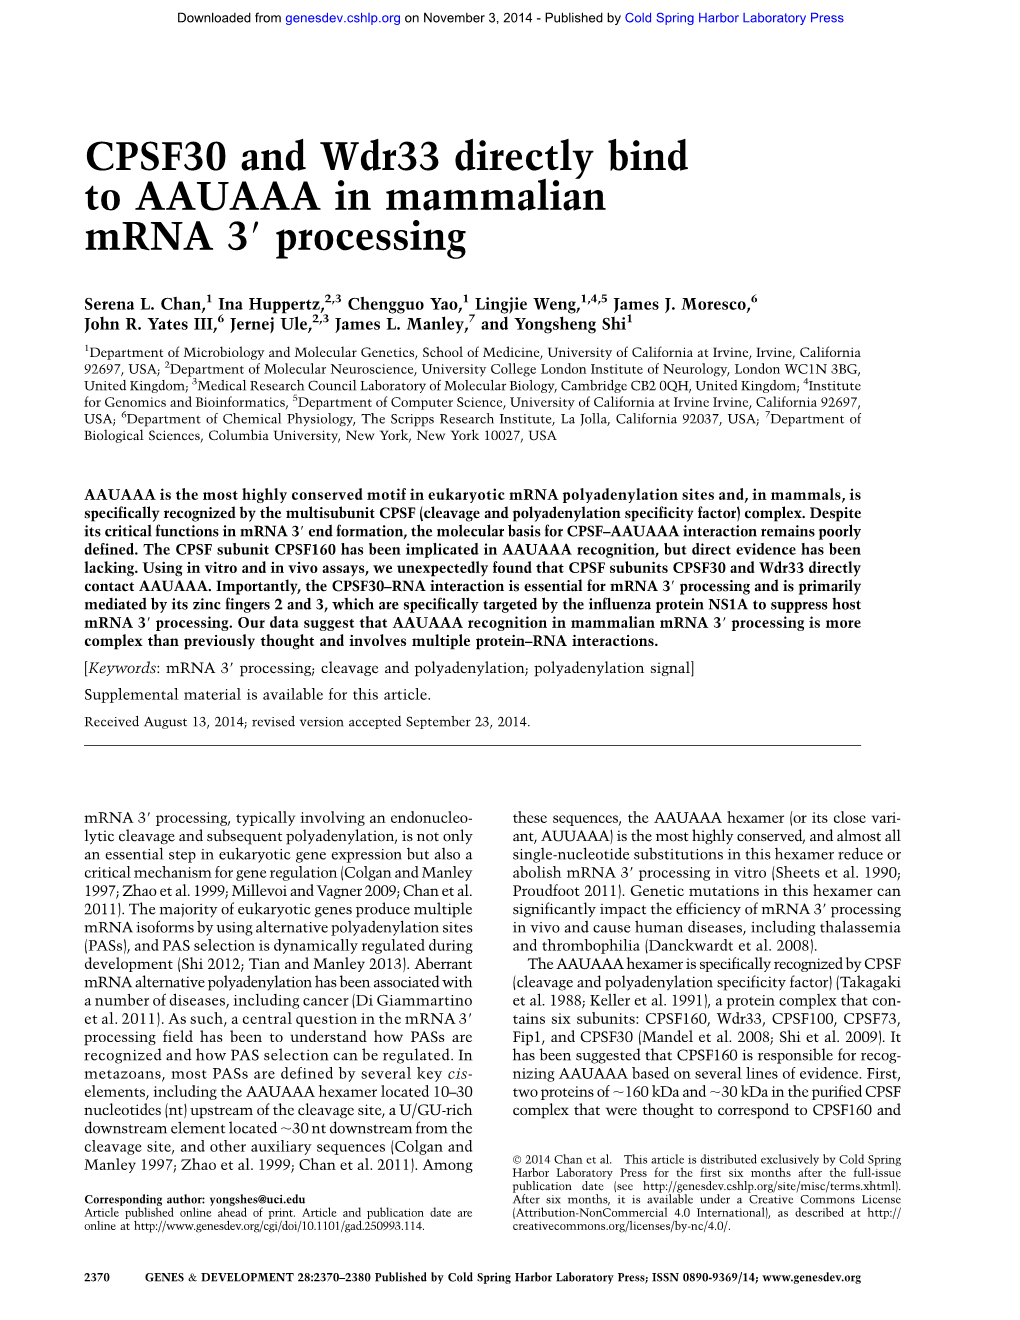 CPSF30 and Wdr33 Directly Bind to AAUAAA in Mammalian Mrna 39 Processing